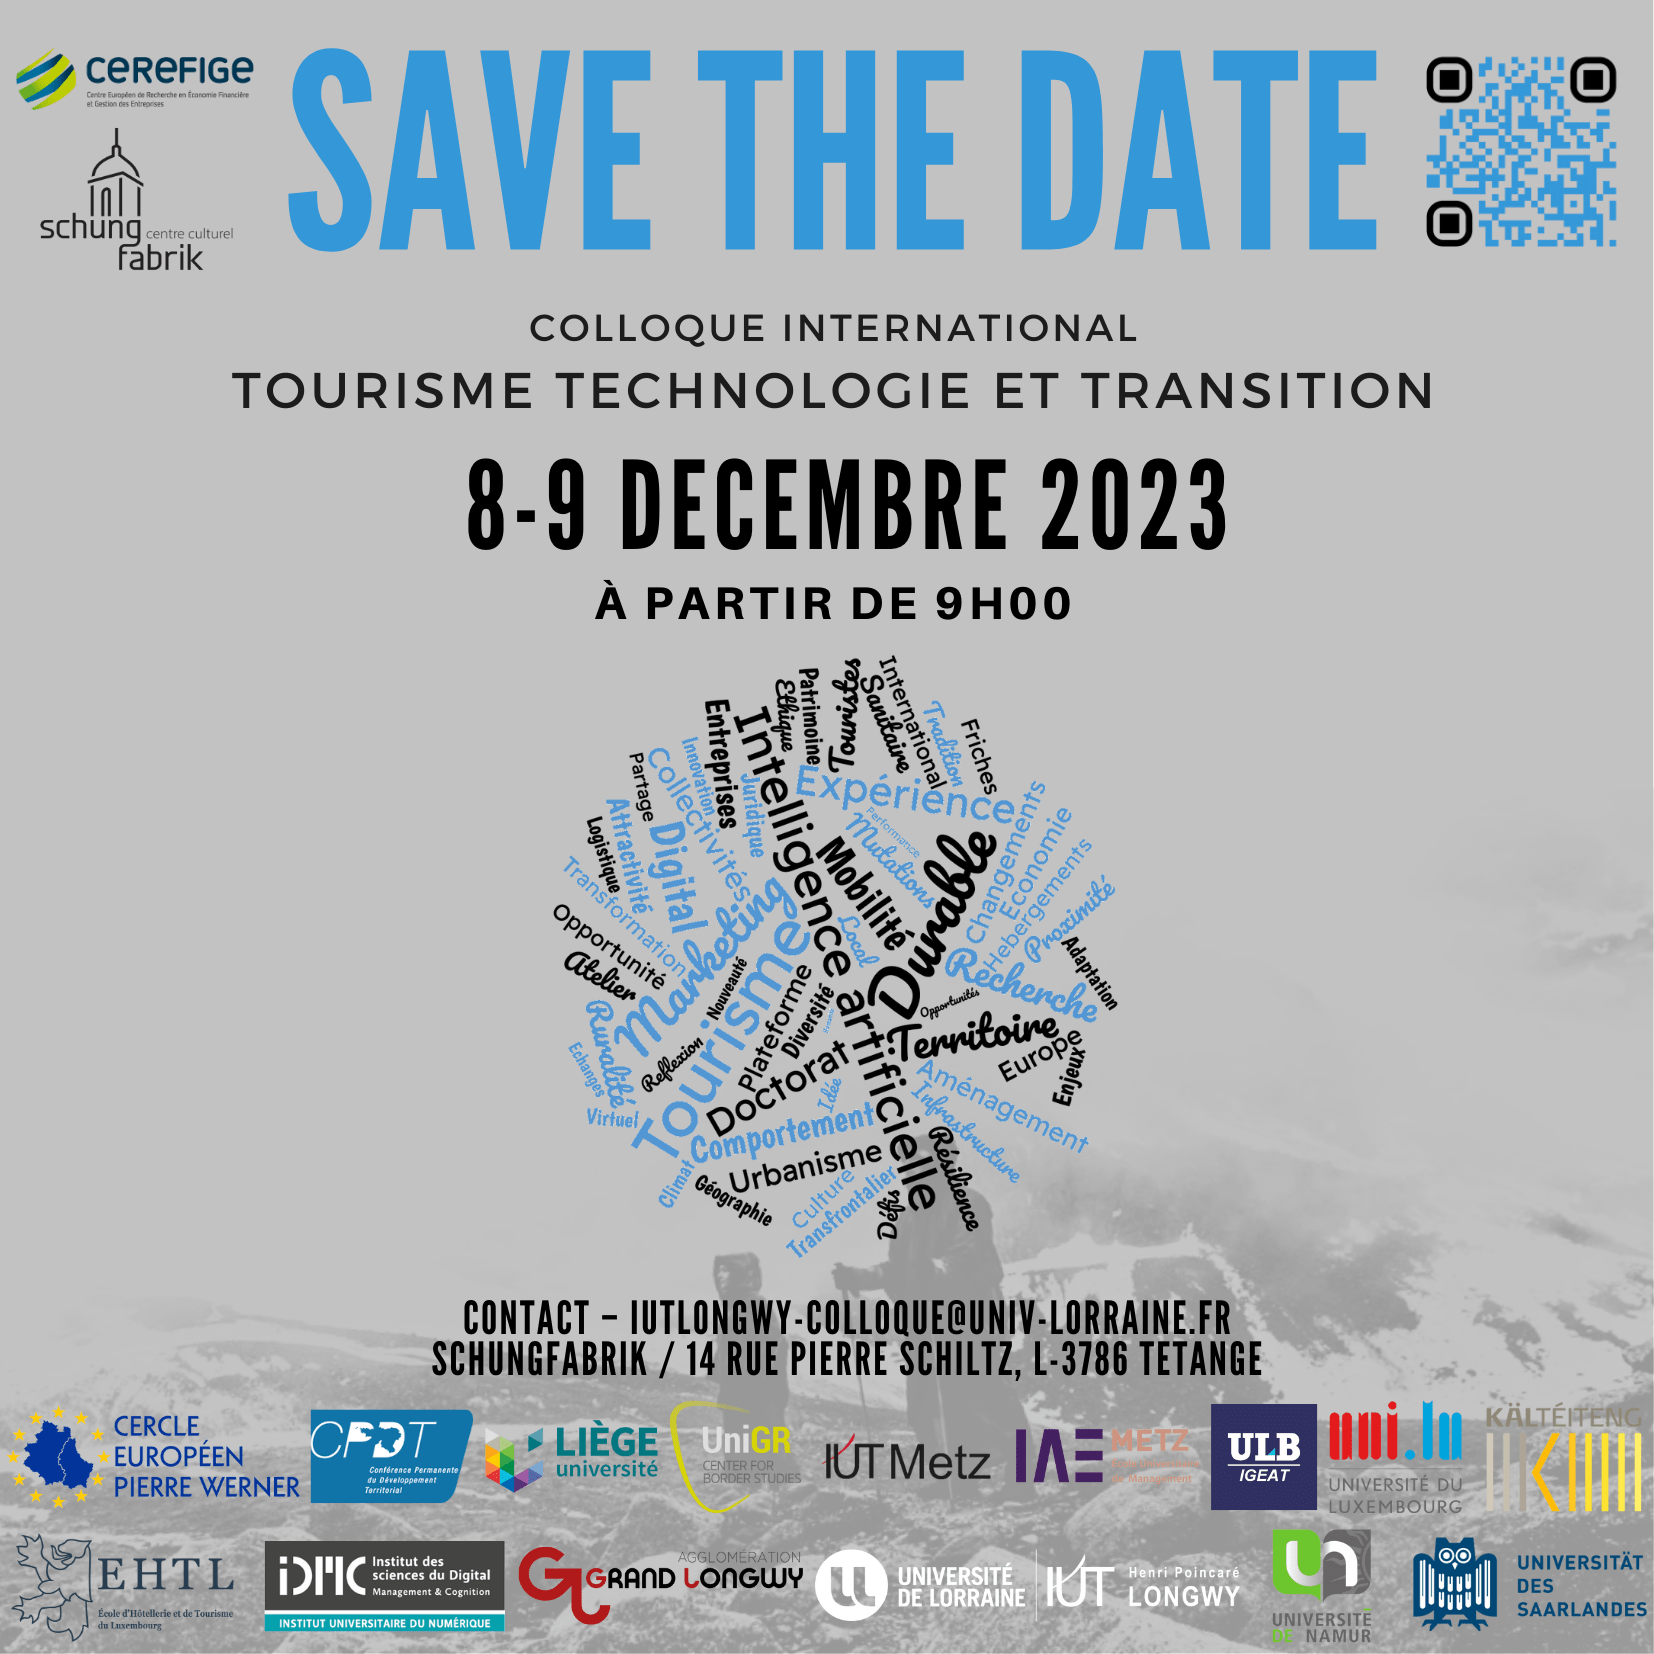 You are currently viewing Save the date 8-9 décembre : tourisme technologie et transition